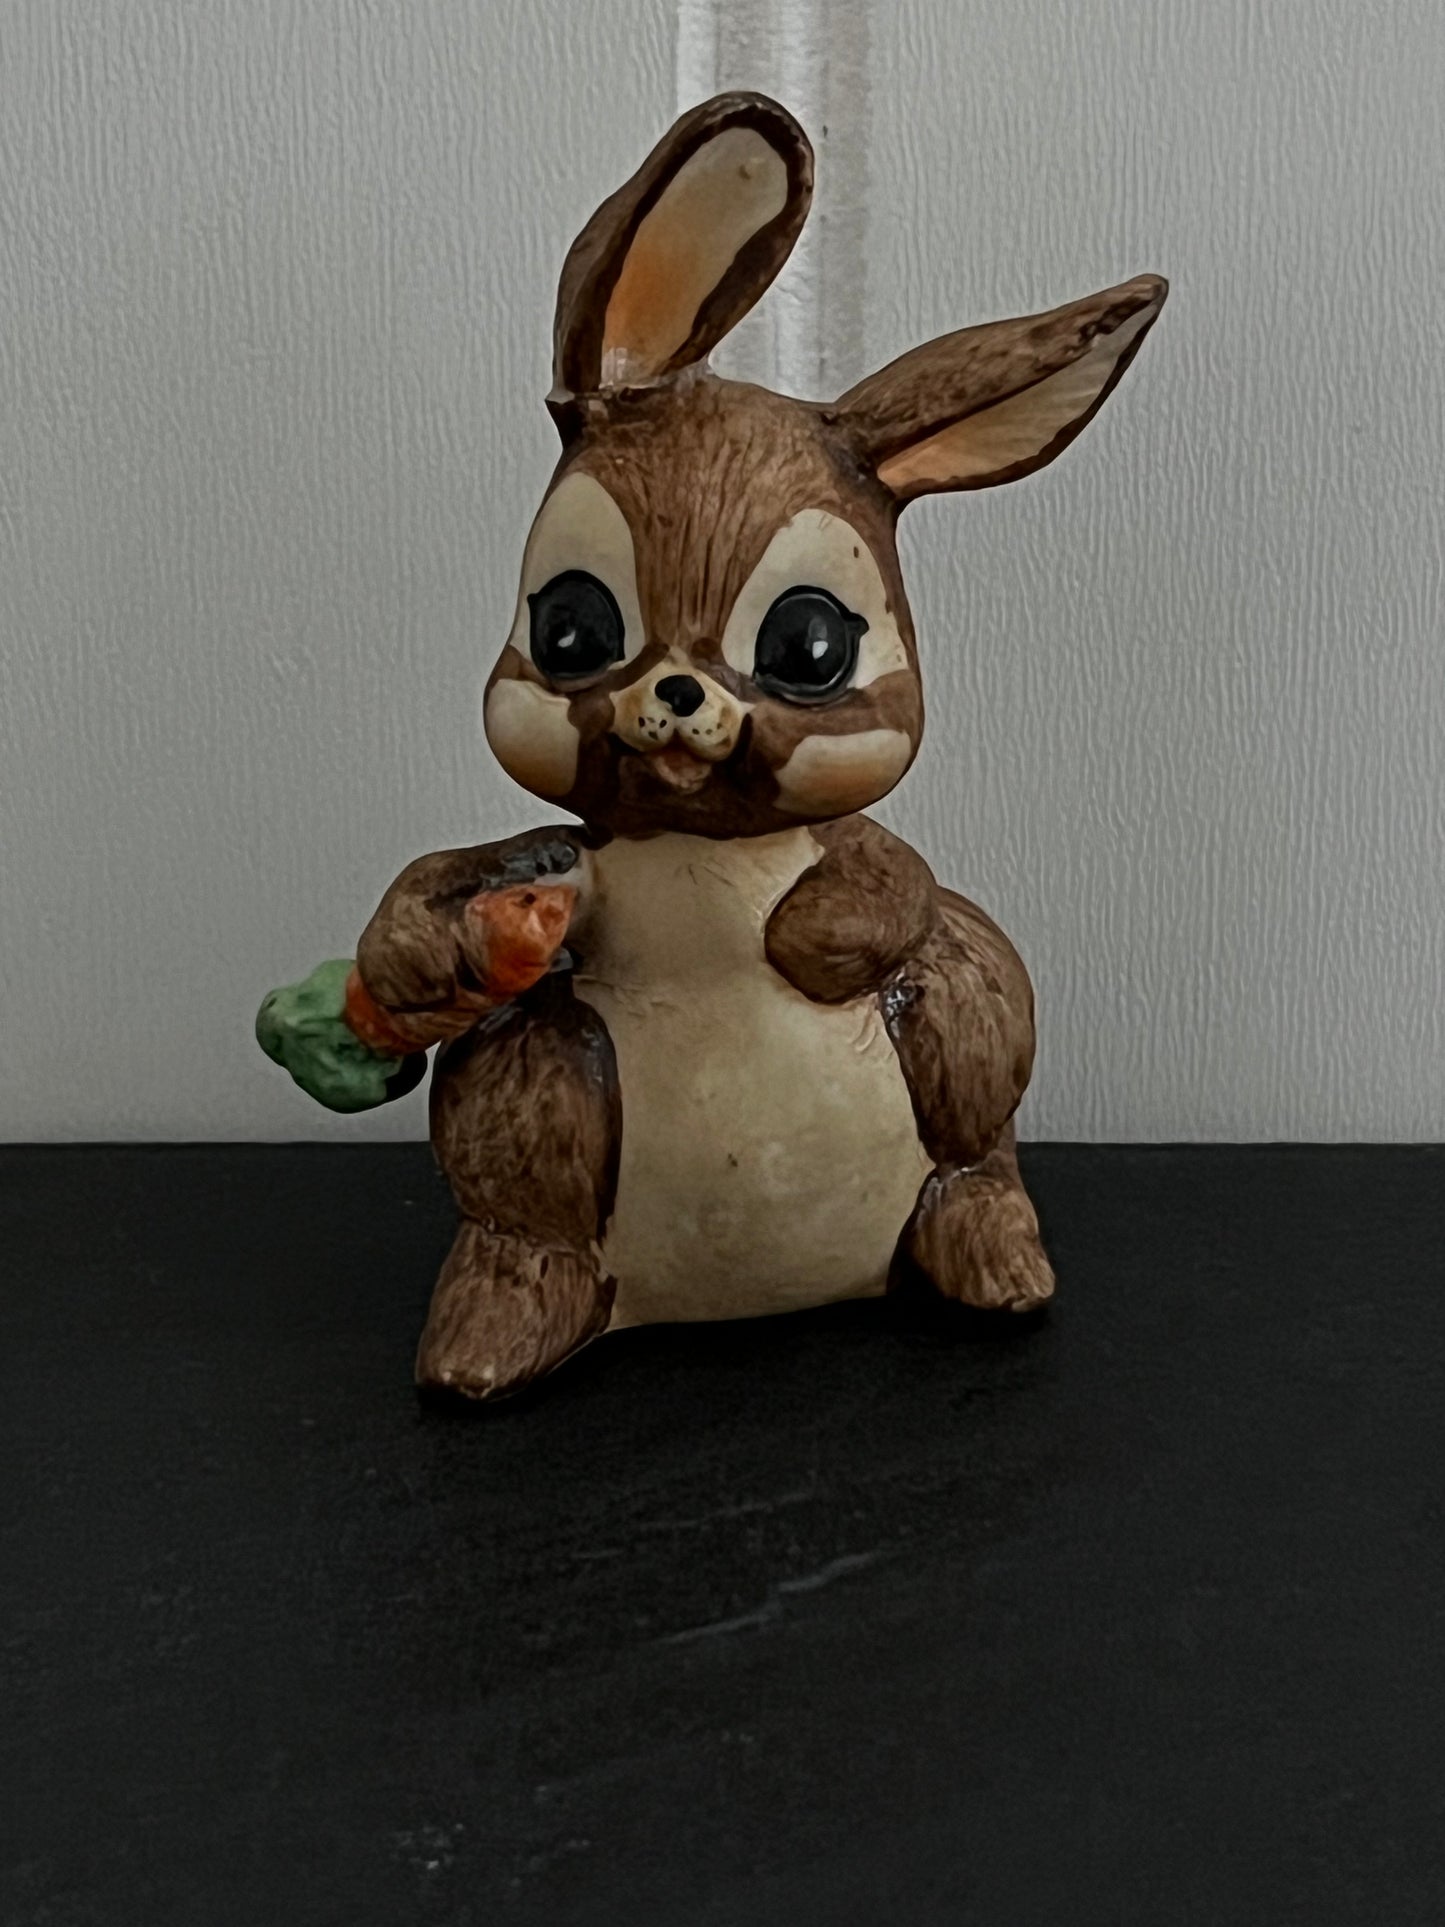 Vintage Hand-Painted Thumper Style Floppy Eared Brown Bunny Rabbit with Carrot Figurine -